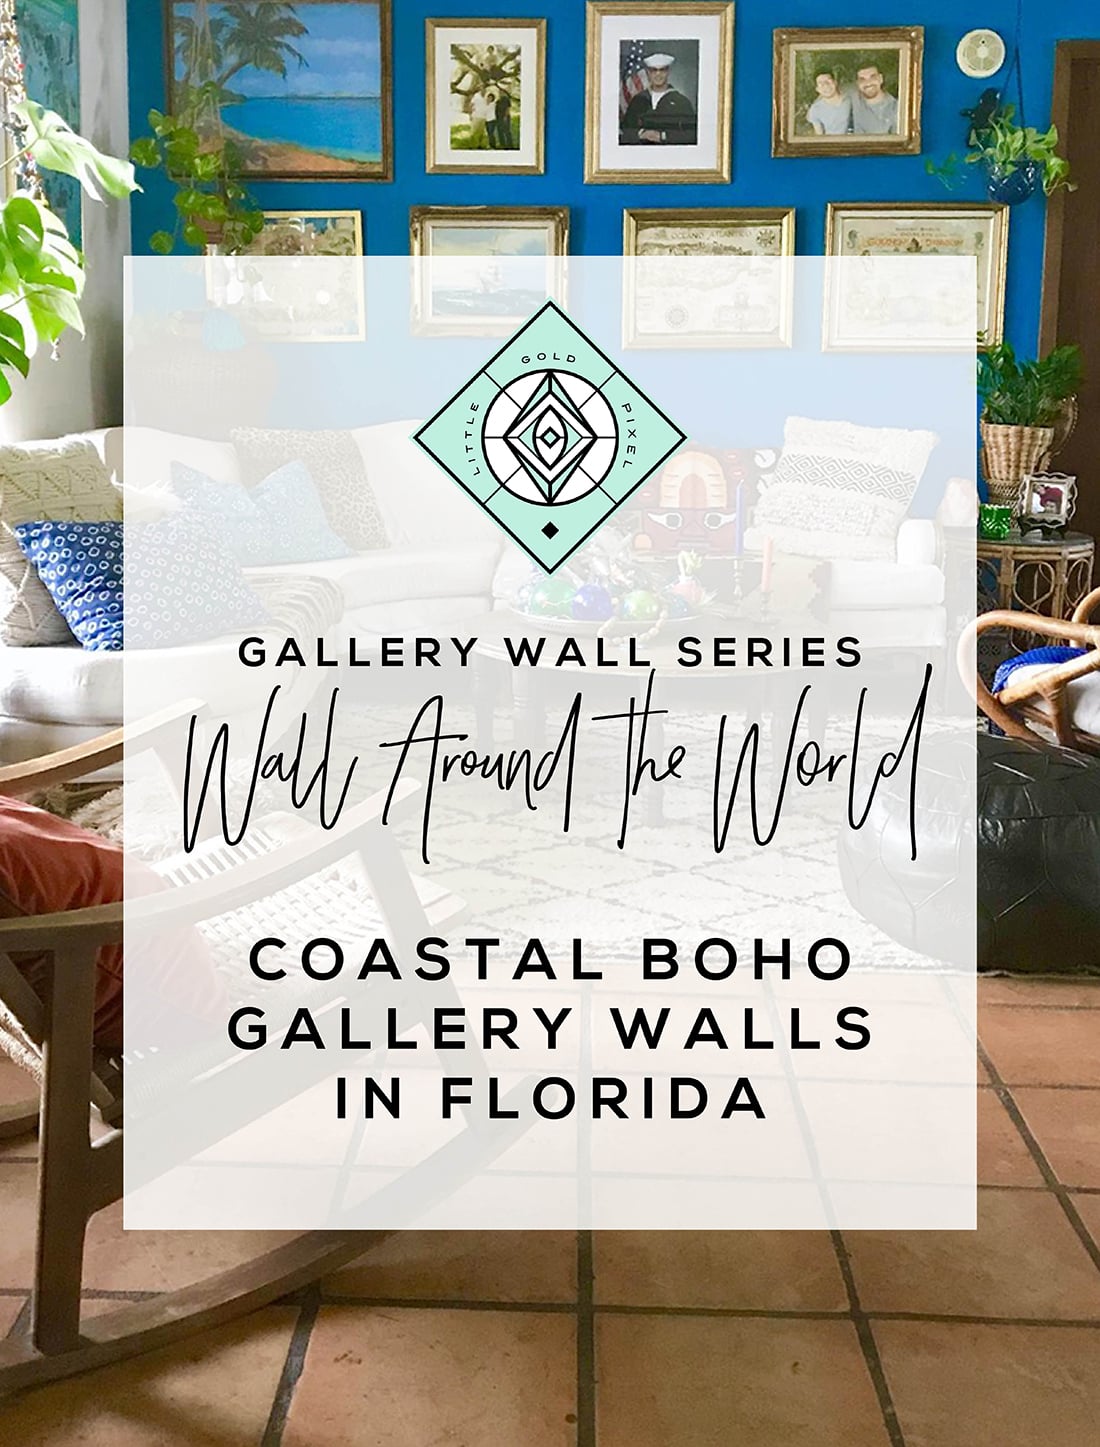 Wall Around the World: A Gallery Wall Series by Little Gold Pixel • Part 8: Coastal Boho Gallery Walls in Florida • Photos © Lilly Ortiz